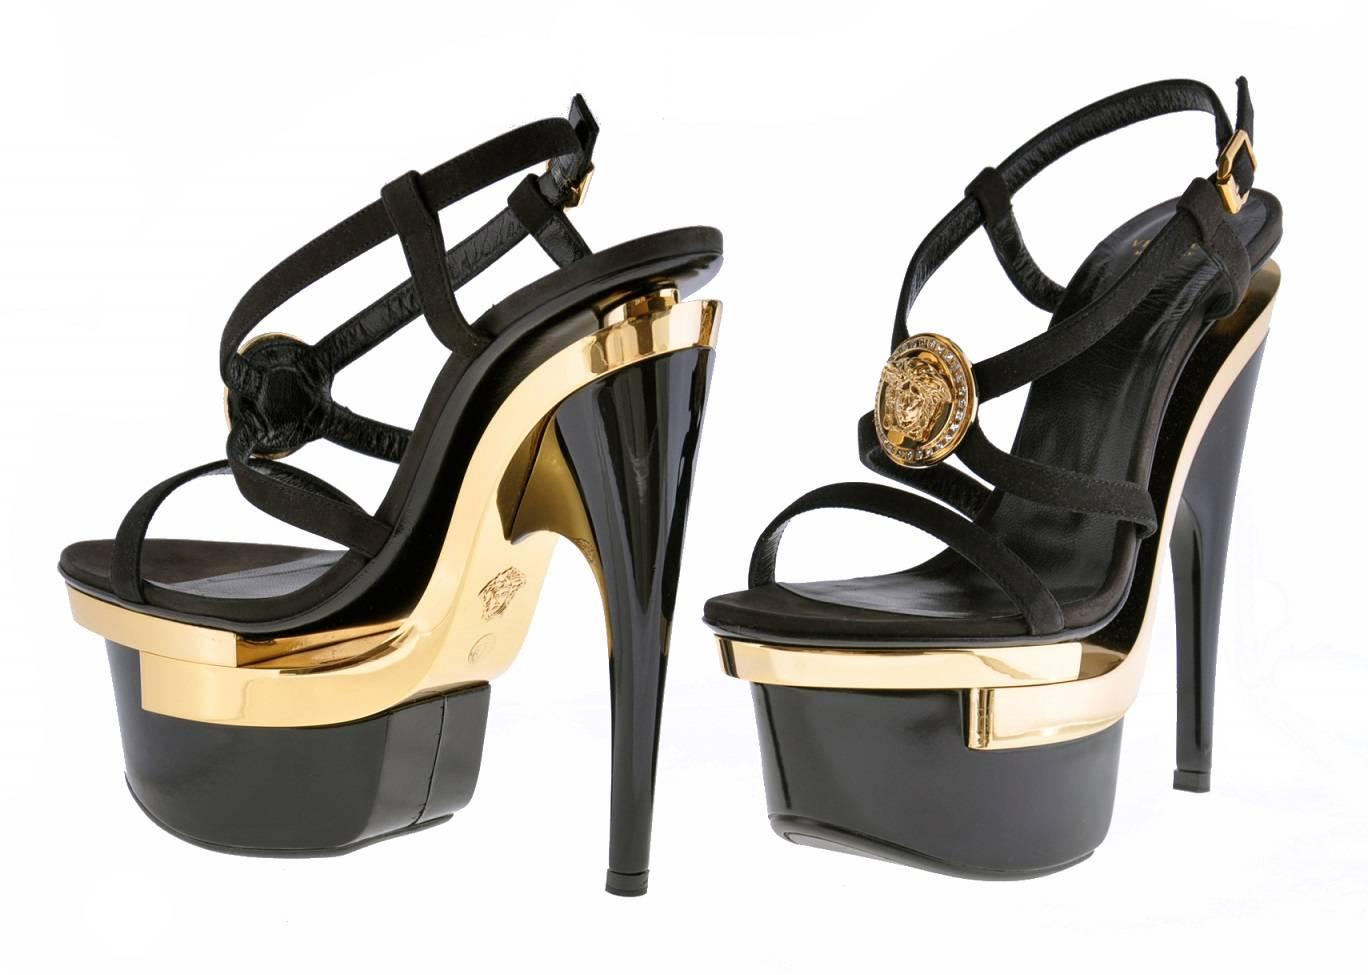 VERSACE TRIPLE PLATFORM SANDALS WITH CRISTALS


A Versace statement sandal that lifts you up. Exclusive to the USA. 

100% Leather
Heel 6 inches; Platform 4 inches 
Gold Medusa on front
Multiple straps
Made in Italy

IT Sizes: